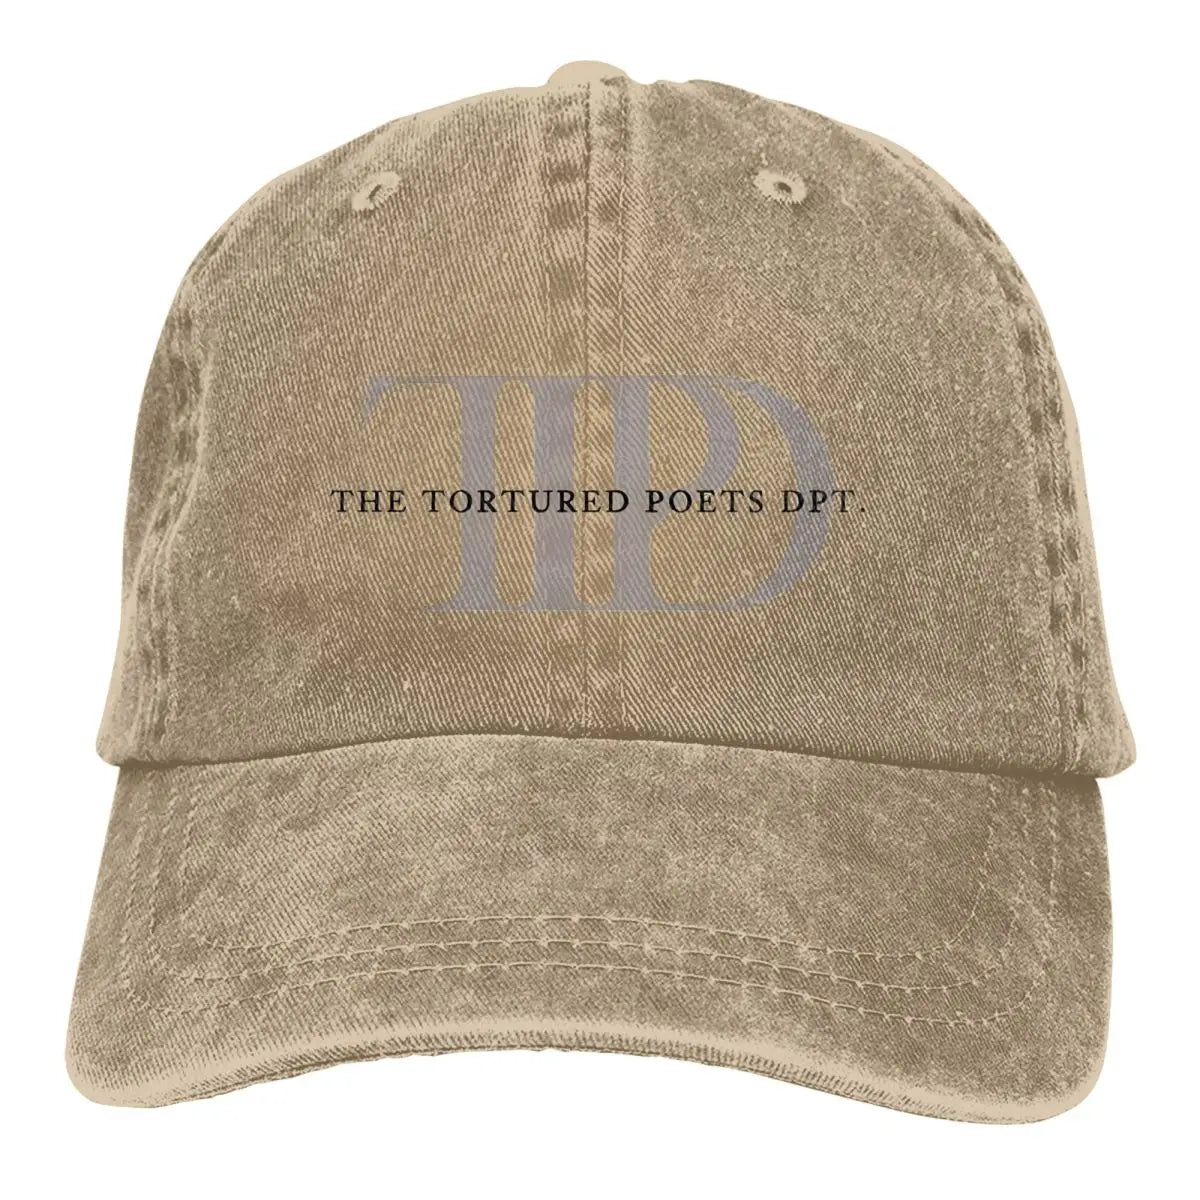 The Tortured Poets Department TTPD Swifts Baseball Caps Merch Classic Distressed Cotton Dad Hat Adjustable Caps Hat